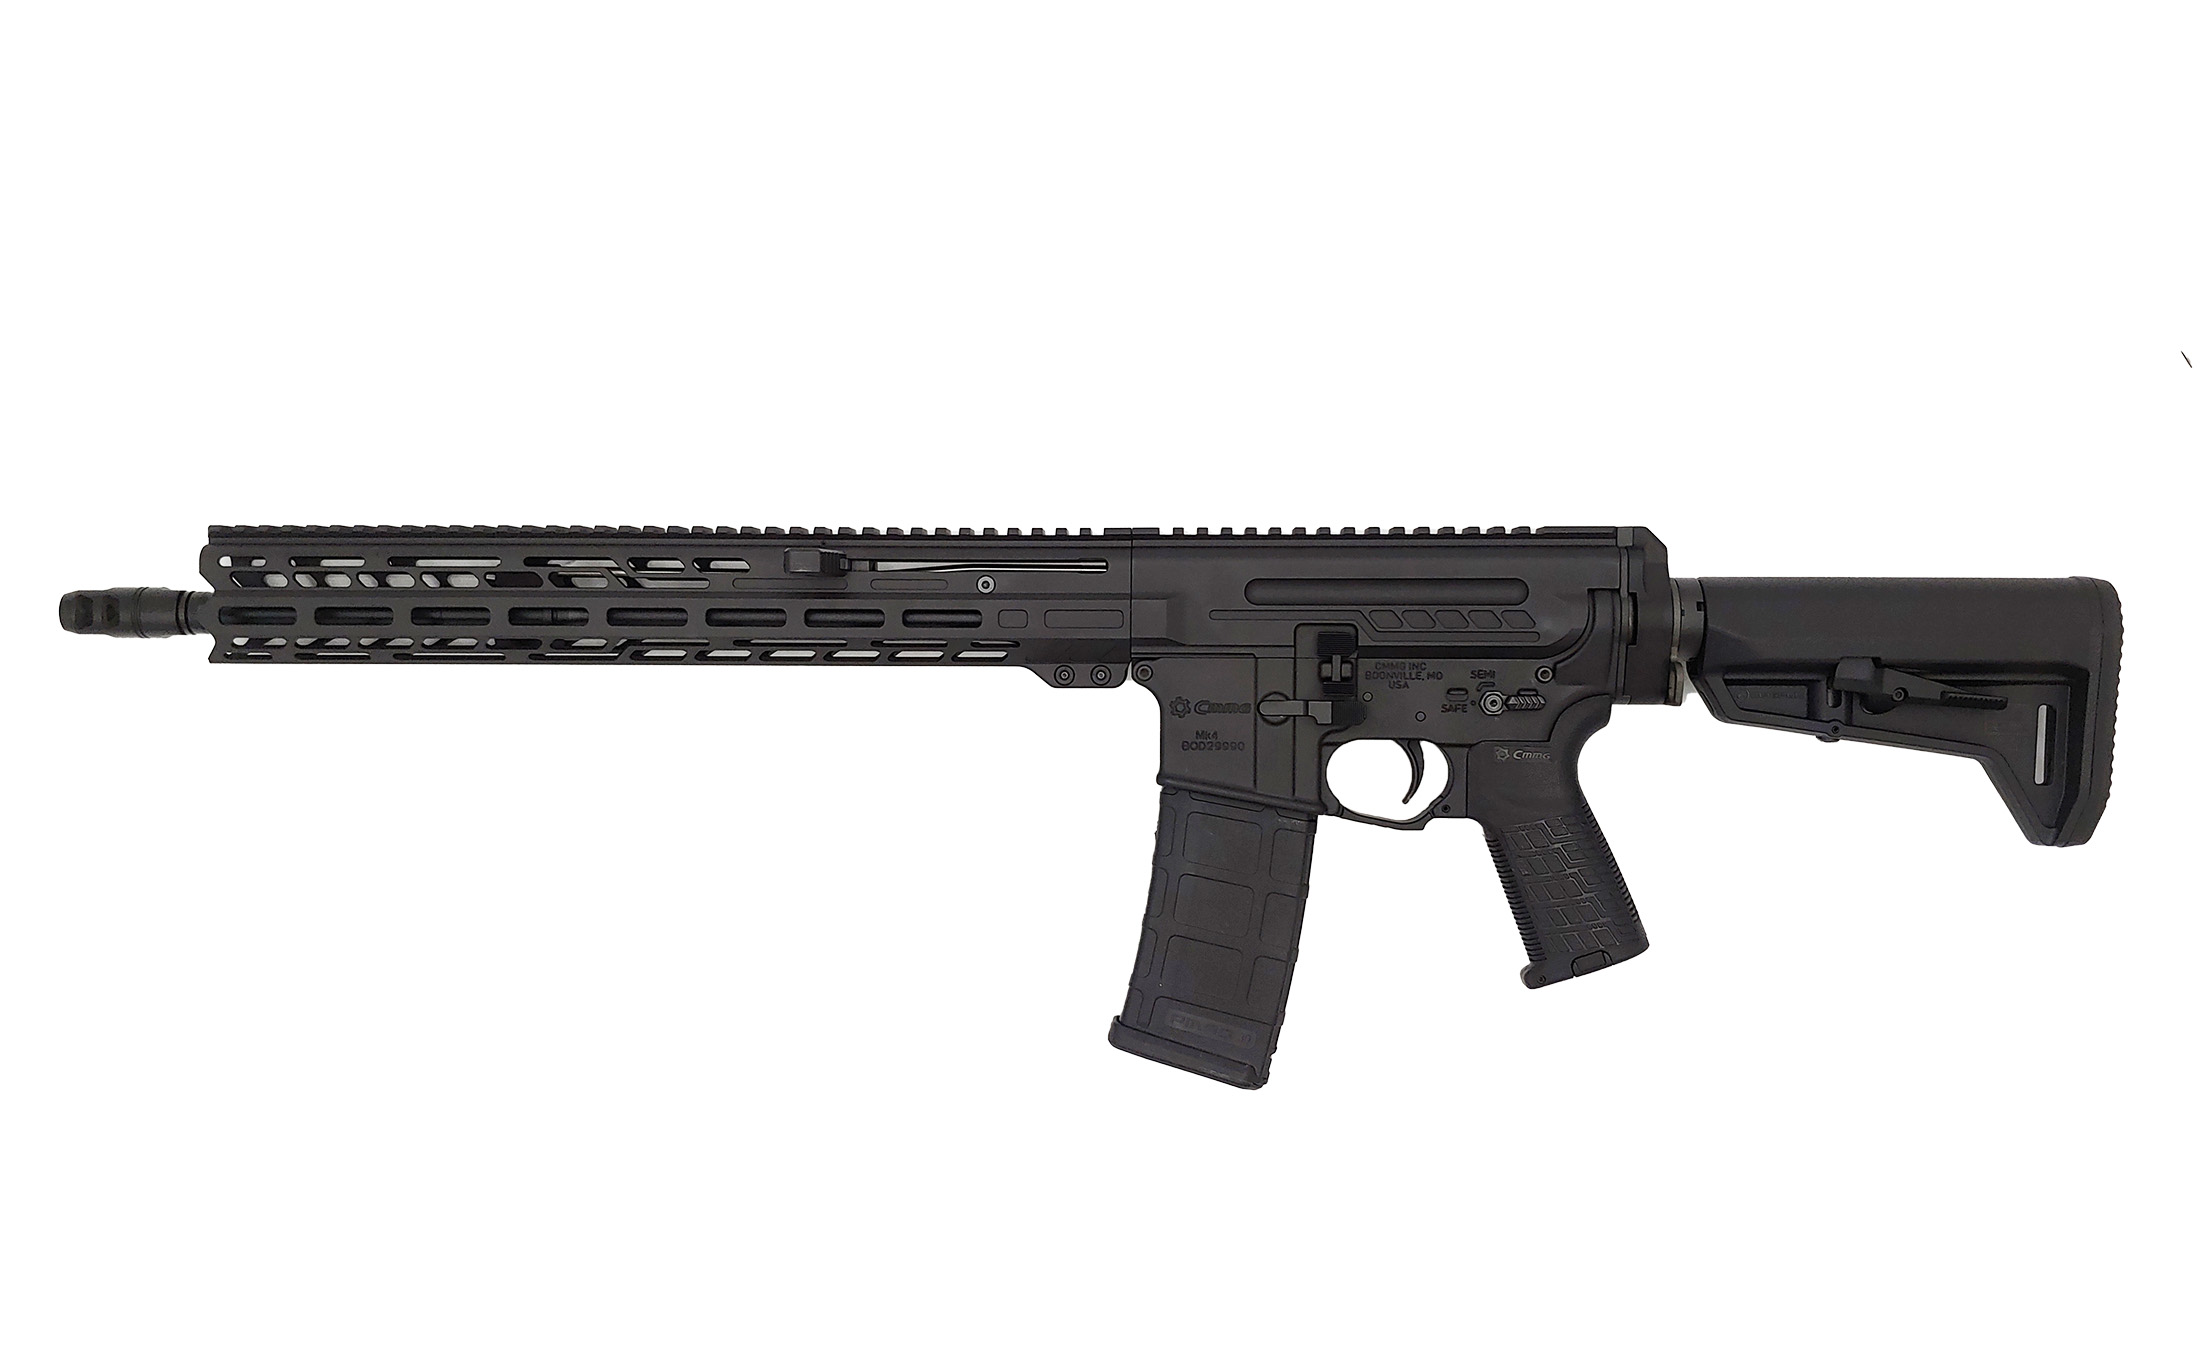 CMMG Dissent Mk4, 5.56mm, 16.1" Barrel, 2- 30rd PMAGs, Collapsible Stock, B-img-1